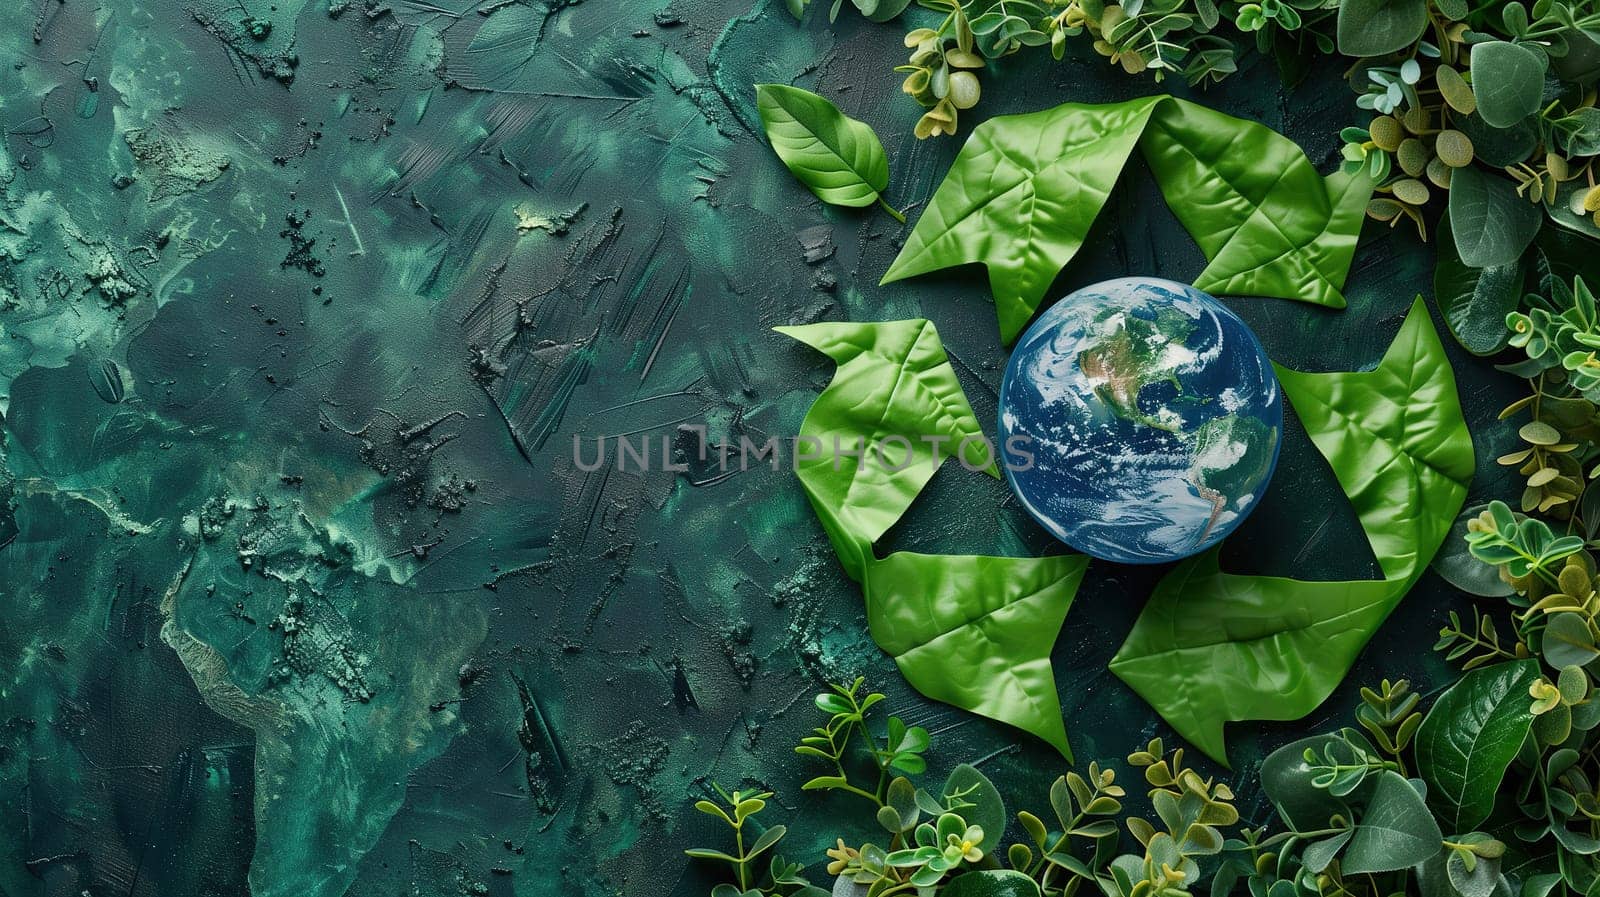 Celebrating Earth Day With a Recycle Symbol and Globe Surrounded by Foliage on a Green Background by TRMK